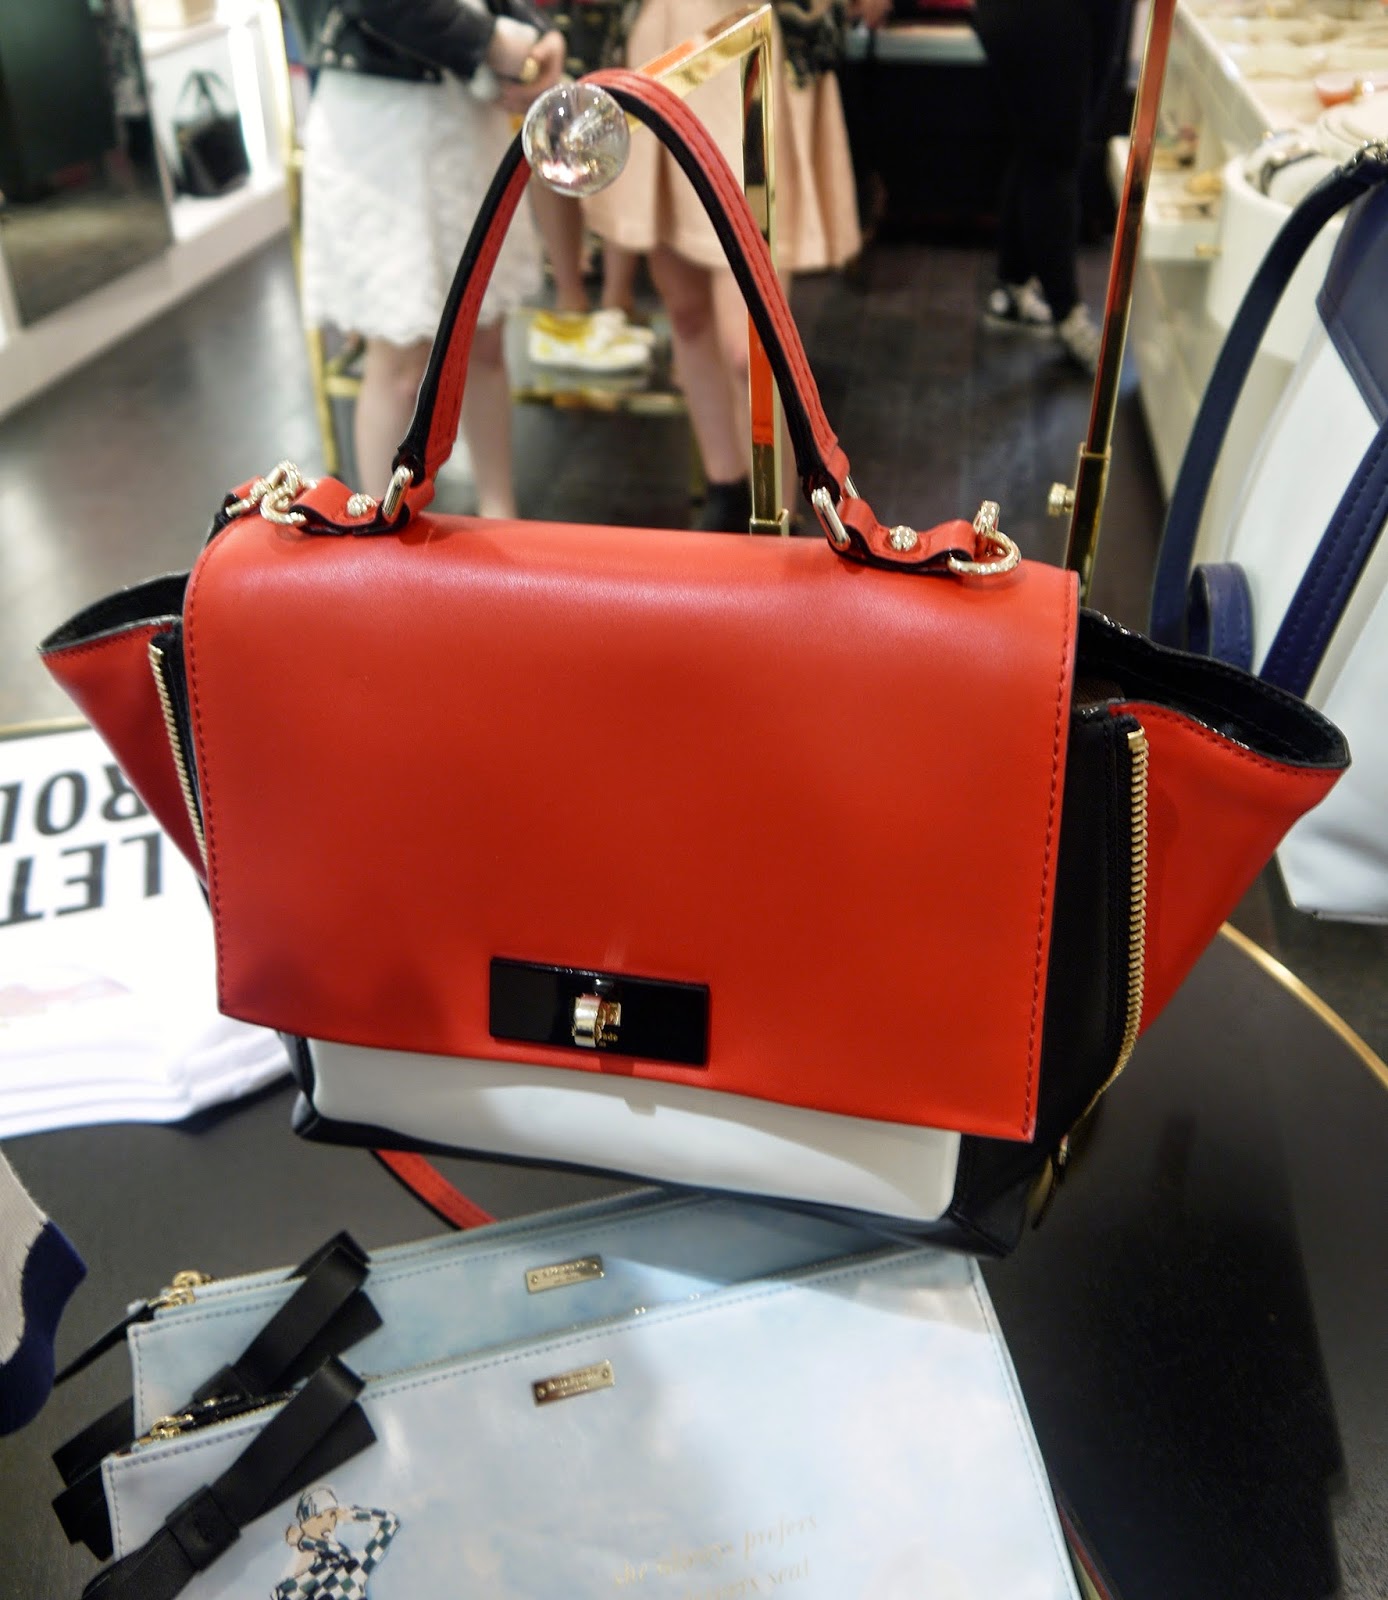 The Gorgeous Cross Body Abbie Bag from Kate Spade